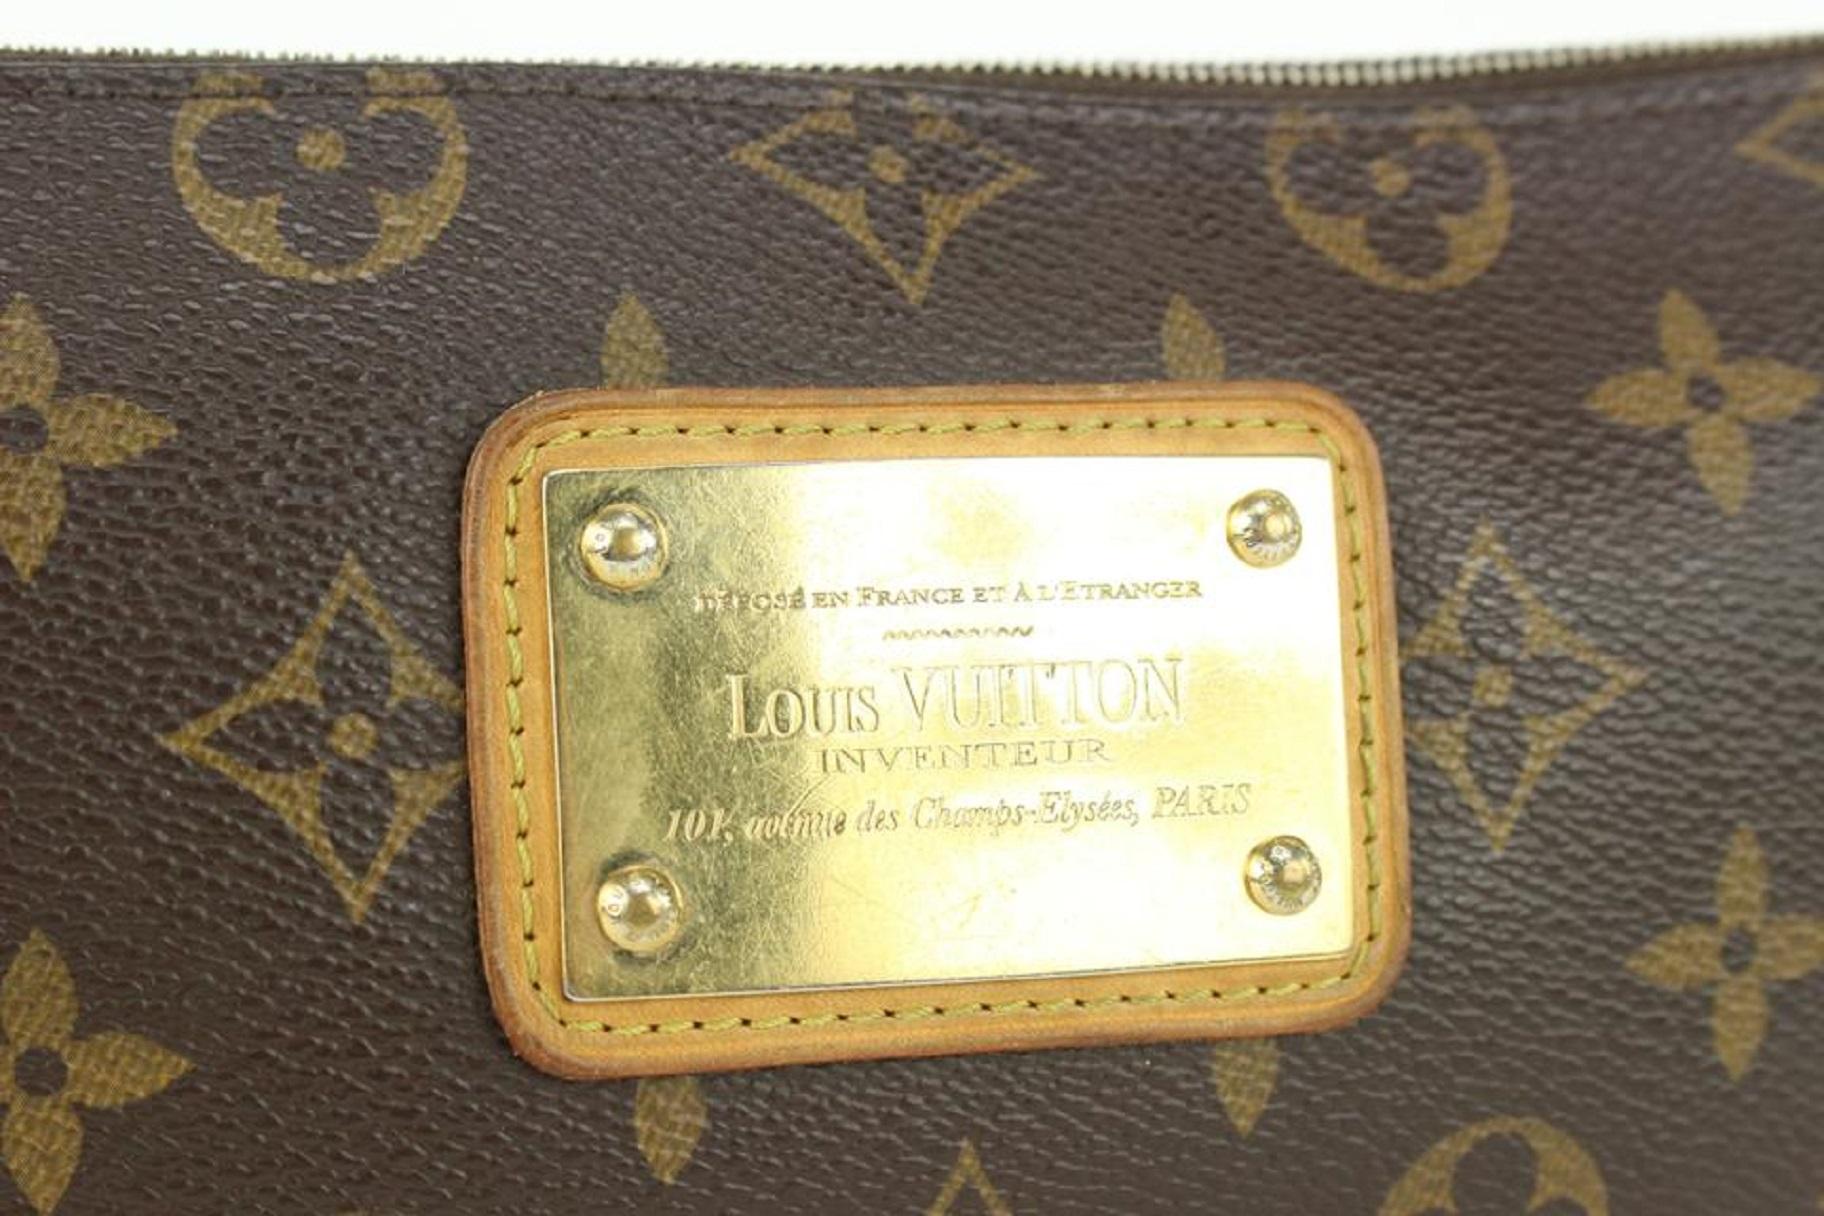 Louis Vuitton Monogram Pochette Sophie 2way Crossbody Bag 196lv83 In Good Condition For Sale In Dix hills, NY